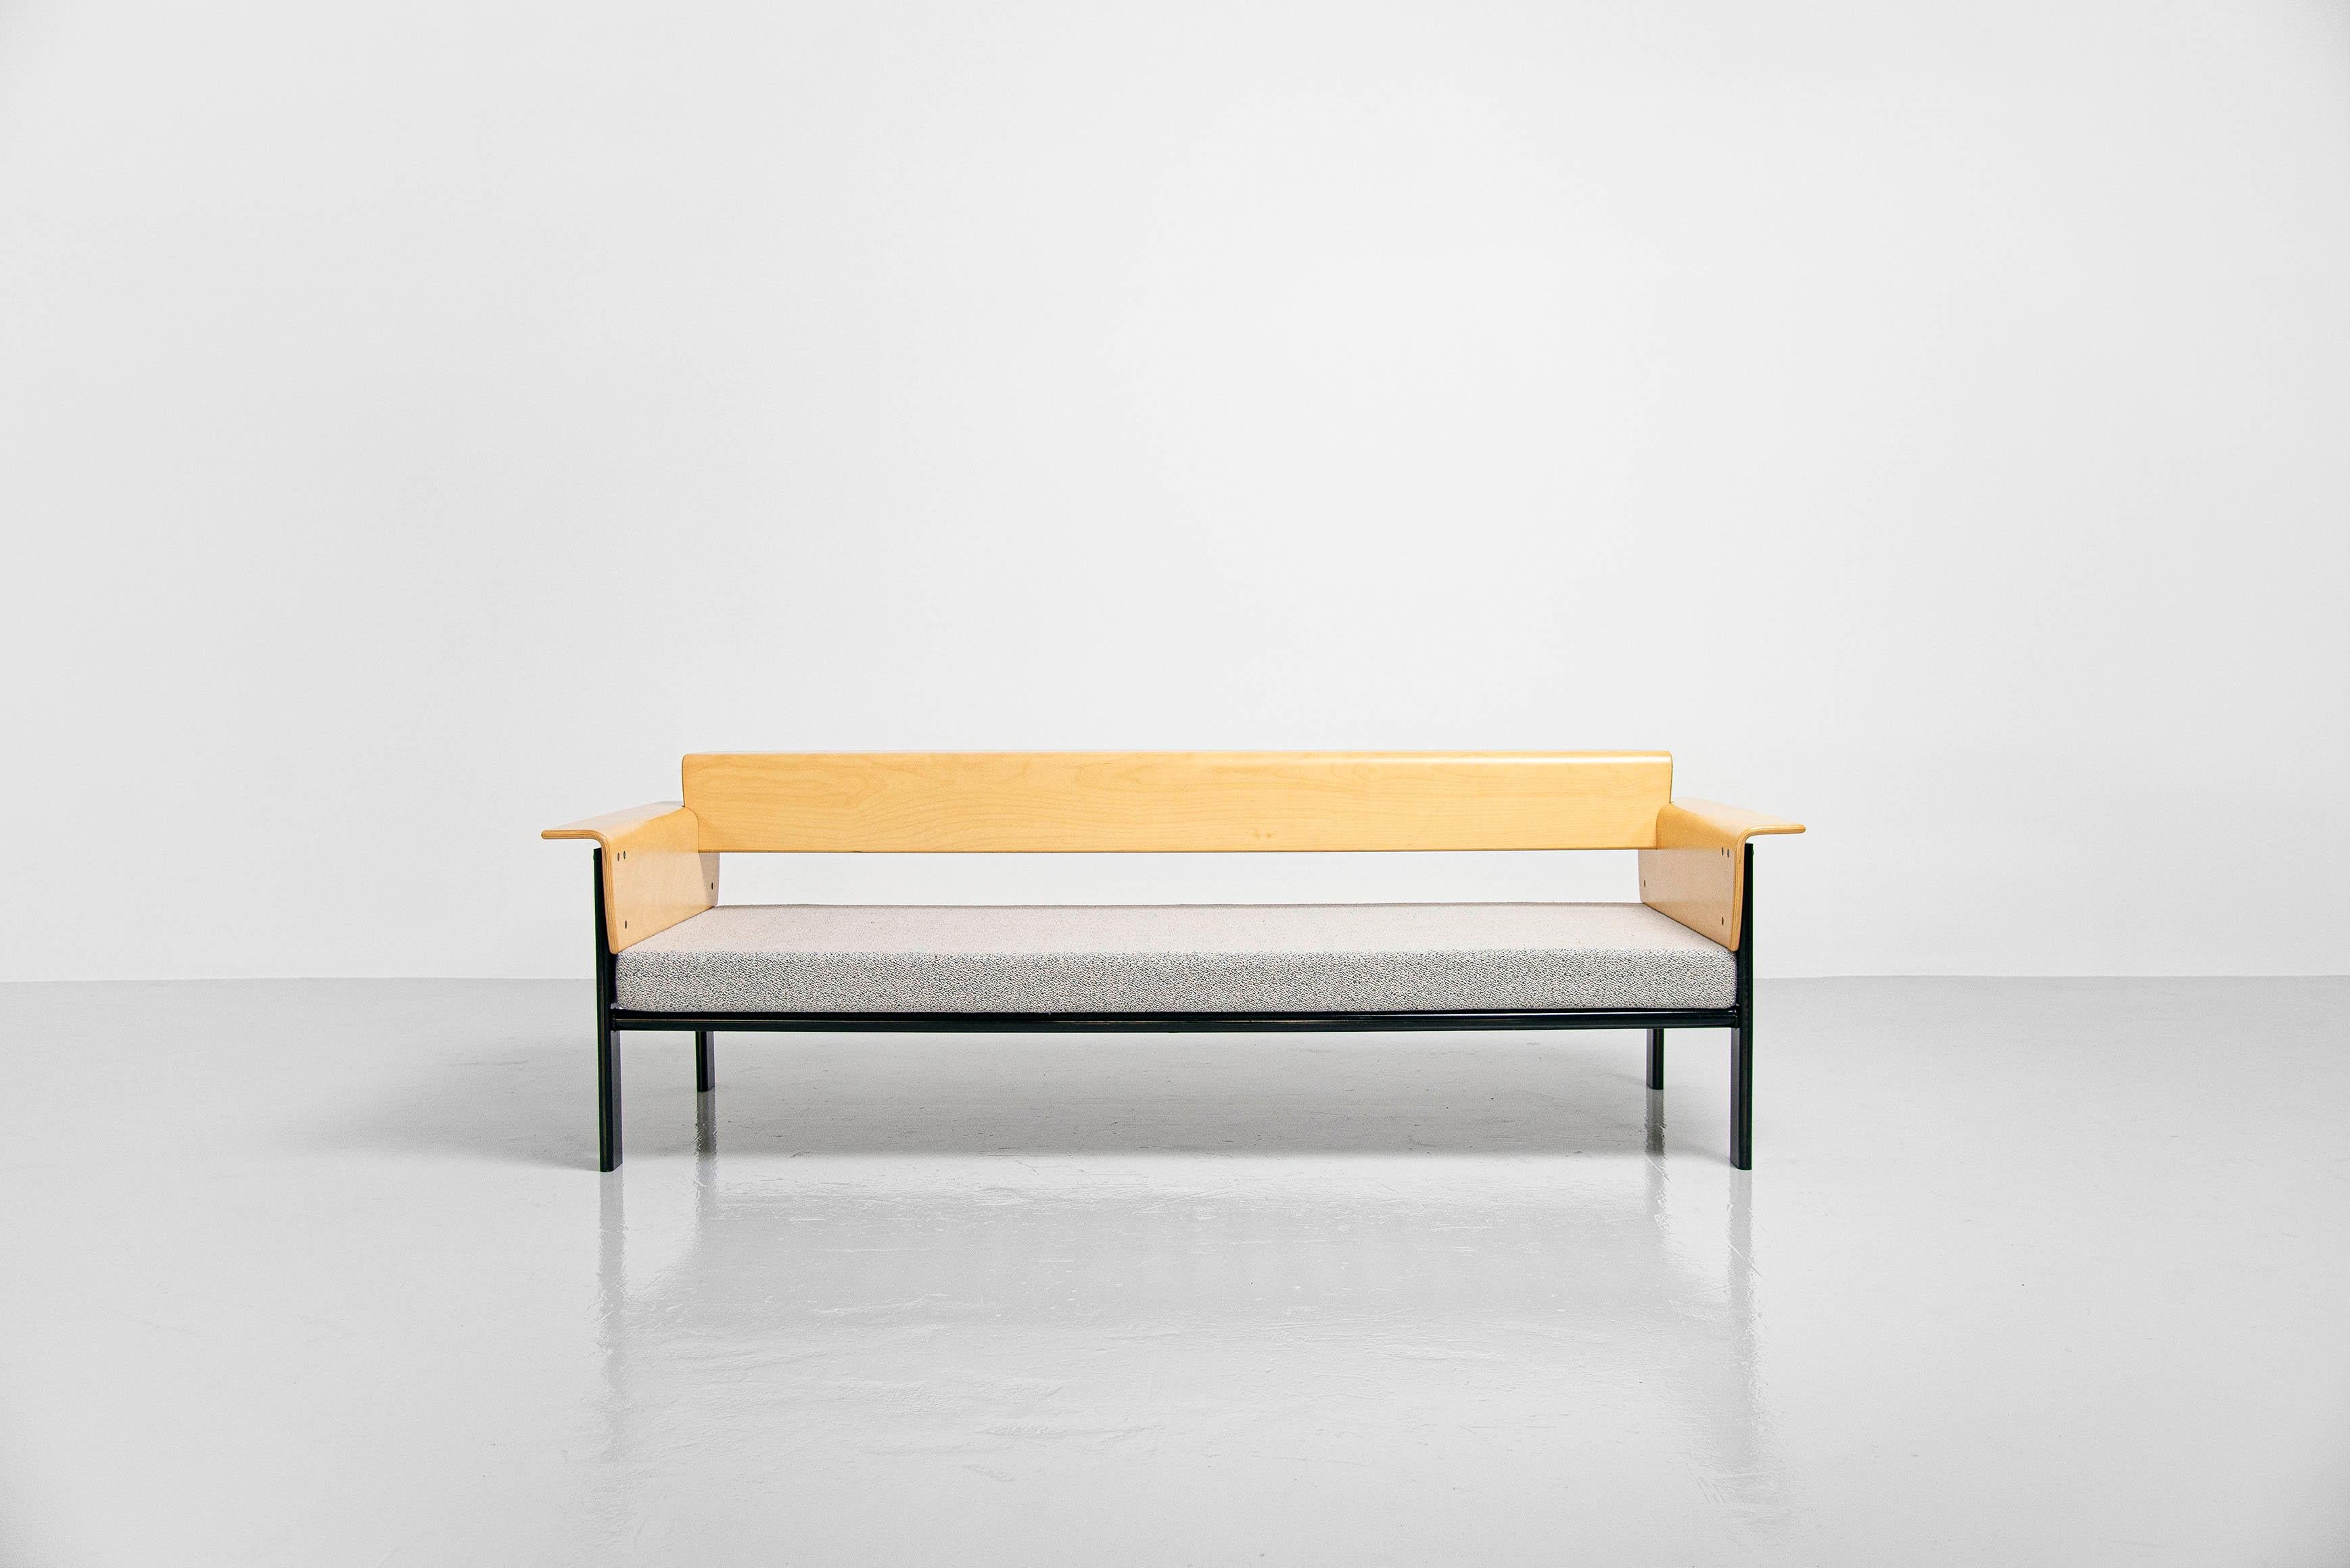 Super rare and beautiful 'Mastro' daybed sofa designed by duo Afra e Tobia Scarpa and manufactured by Molteni 1981. This super shaped daybed has a black painted metal frame and plywood bich arms and back rest. The back rest can be taken out so this